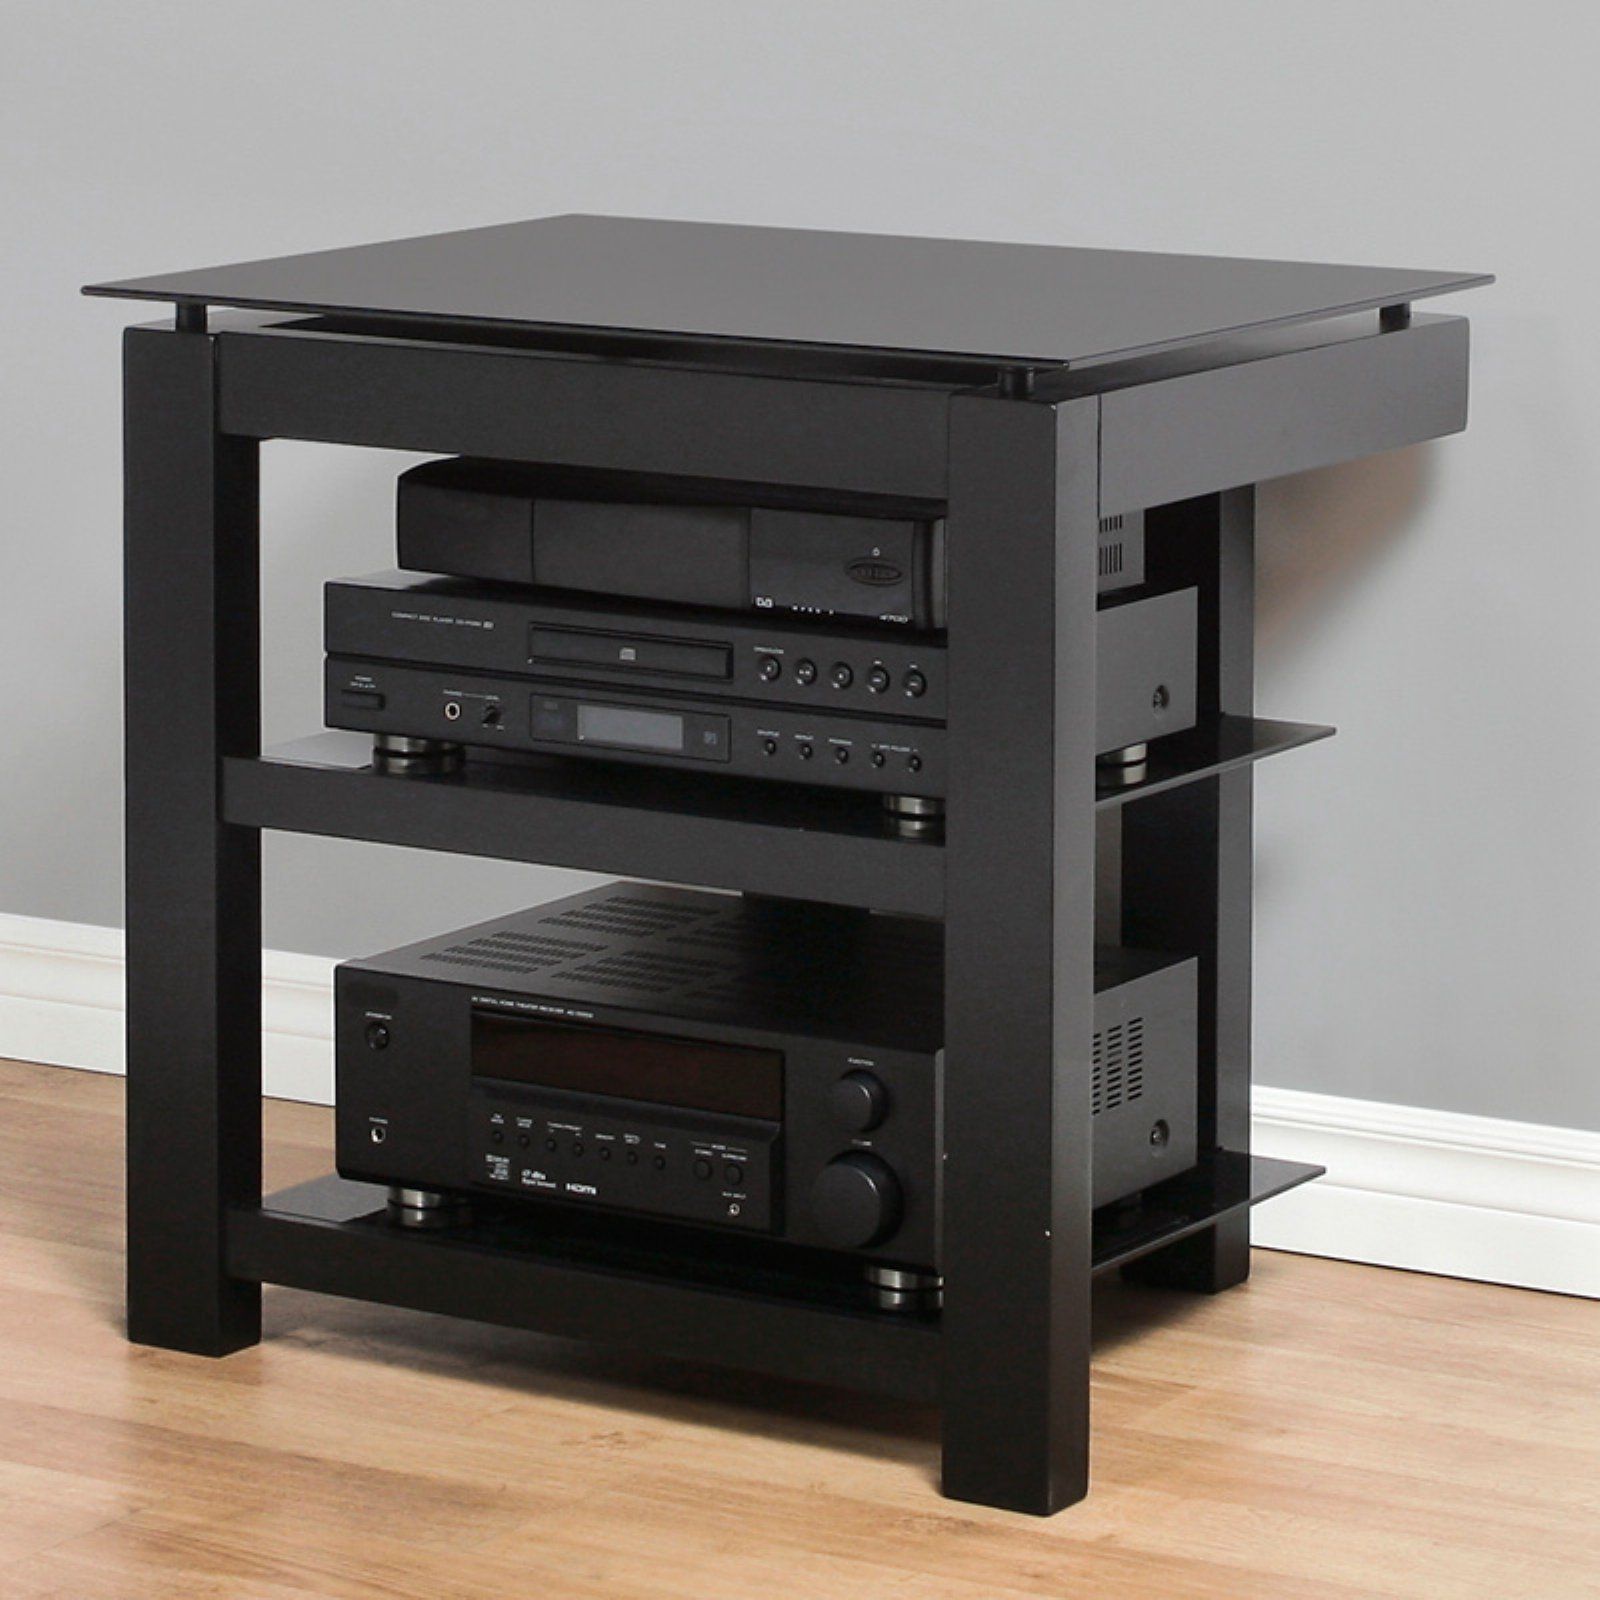 26 Inch Flat Screen Low Profile Tv Stand – Black Glass And Intended For Black Glass Tv Stands (View 9 of 15)